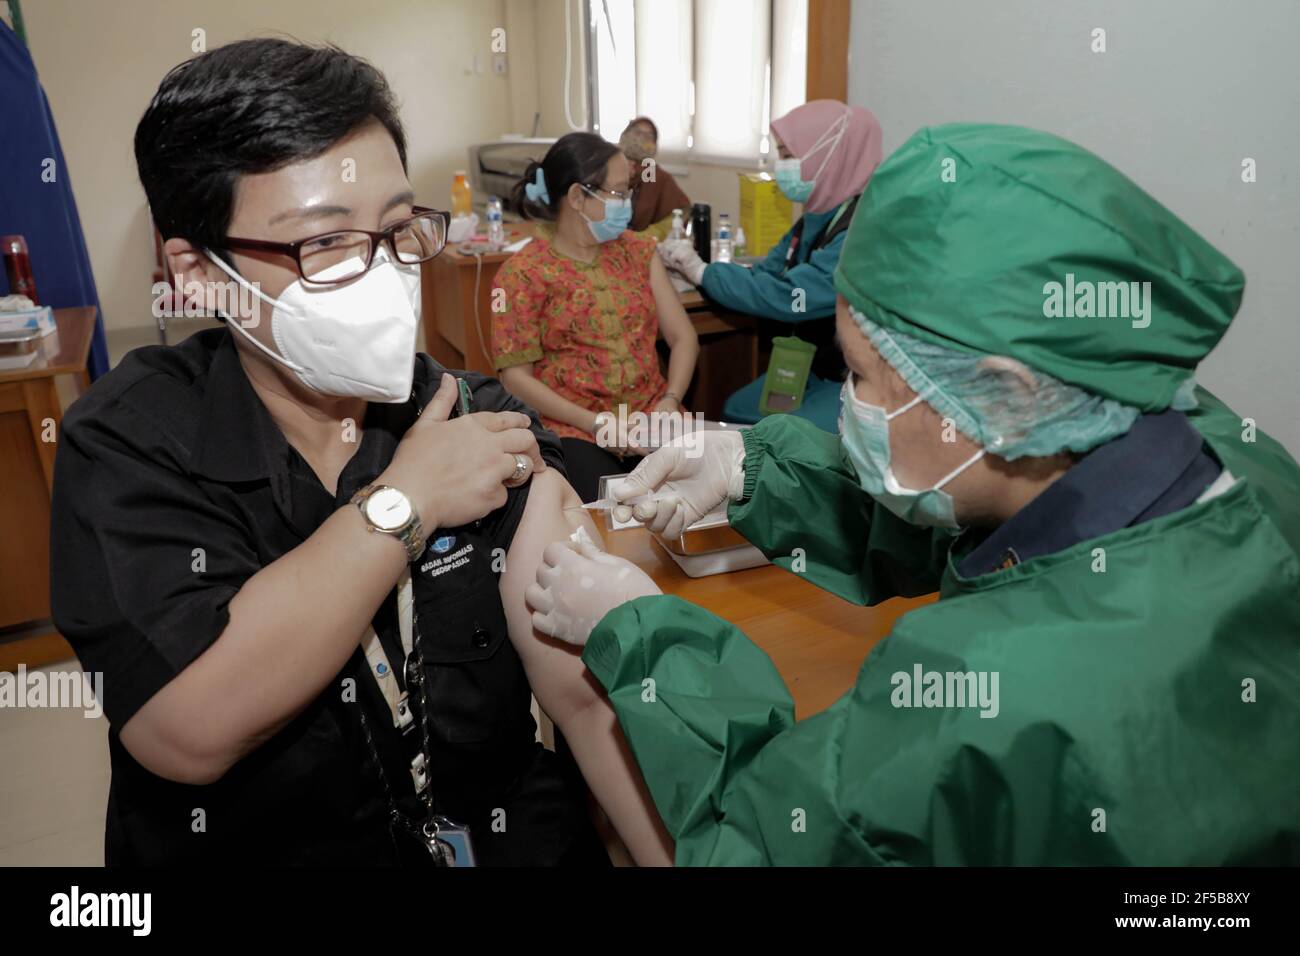 A healthcare worker injects a dose of Sinovac COVID-19 vaccine to a worker during a mass vaccination drive for the public sector workers at Geospatial Information Agency Office in Bogor.Indonesia is currently in the second phase of mass covid-19 vaccination. In this second phase, the Indonesian government targets 38.5 million people, including 16.9 million workers in public sectors and 21.6 million elderly citizens, as well as workers in hospitality, transportation, tourism sectors and mass media workers. Stock Photo